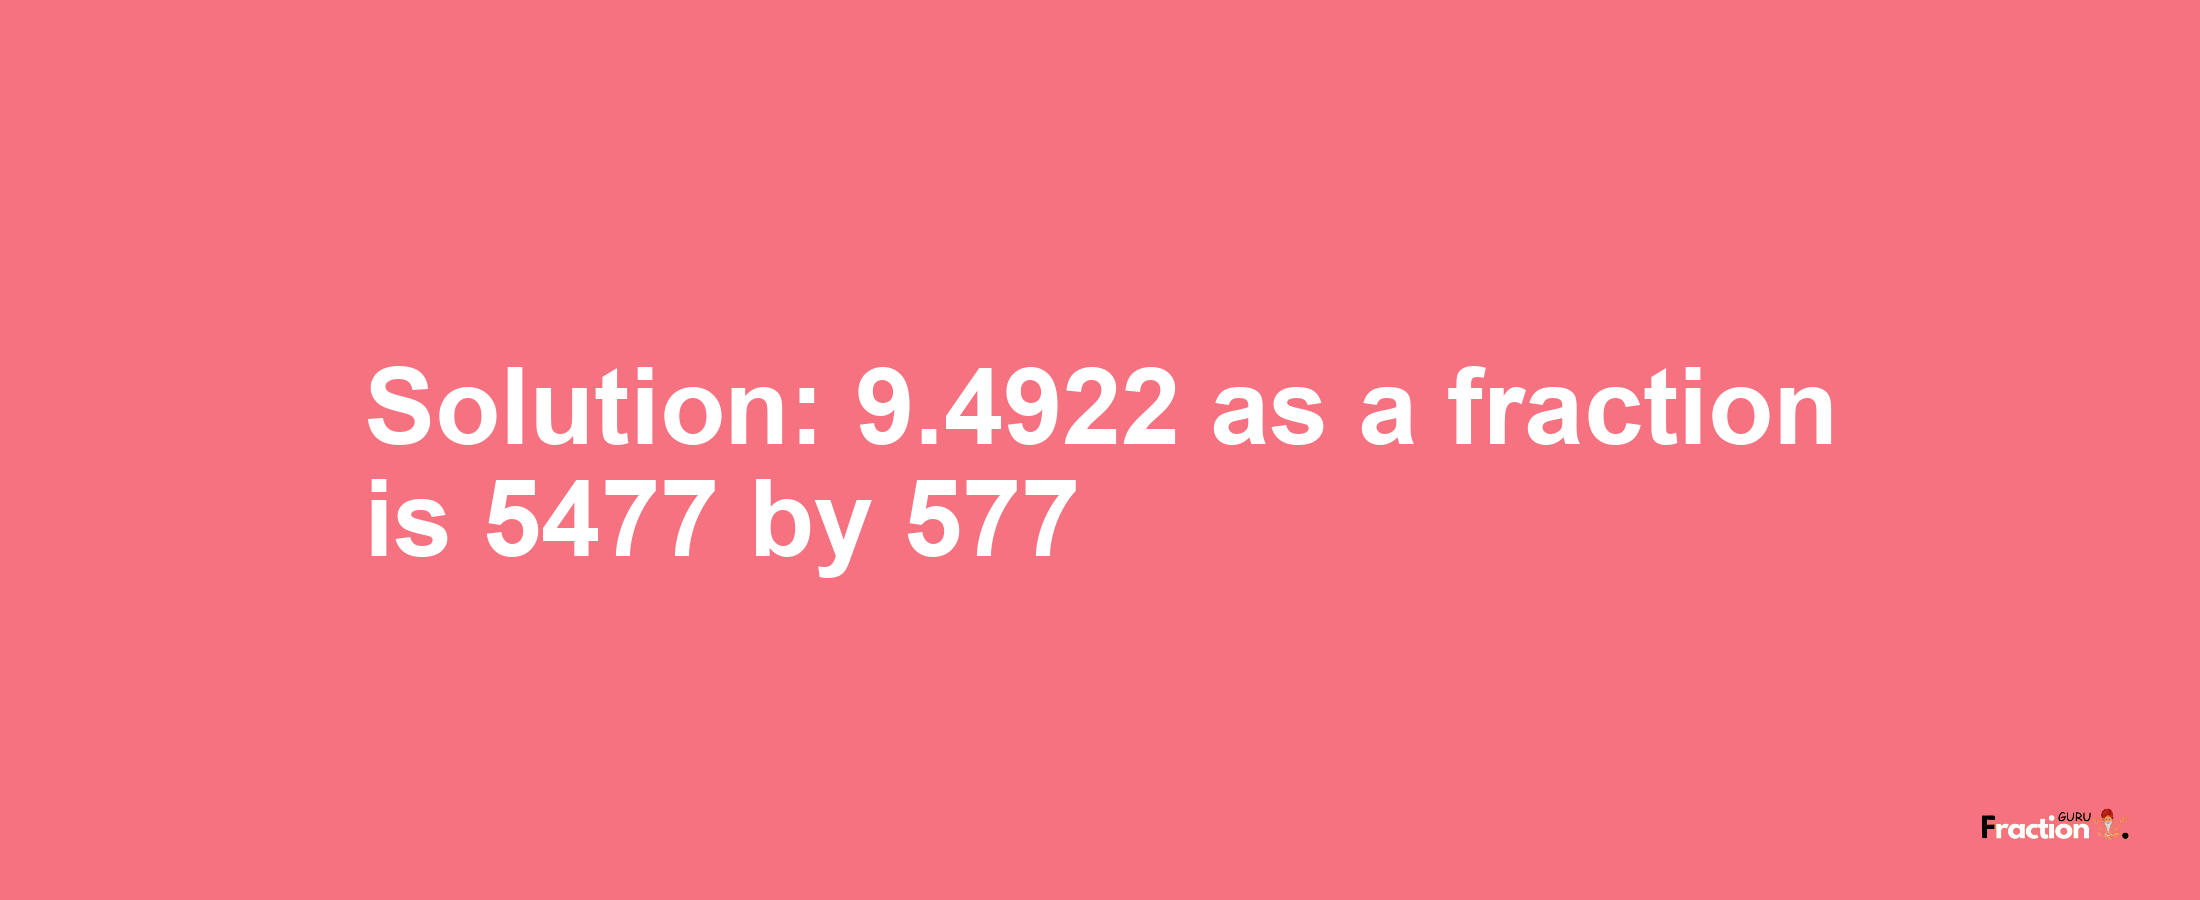 Solution:9.4922 as a fraction is 5477/577